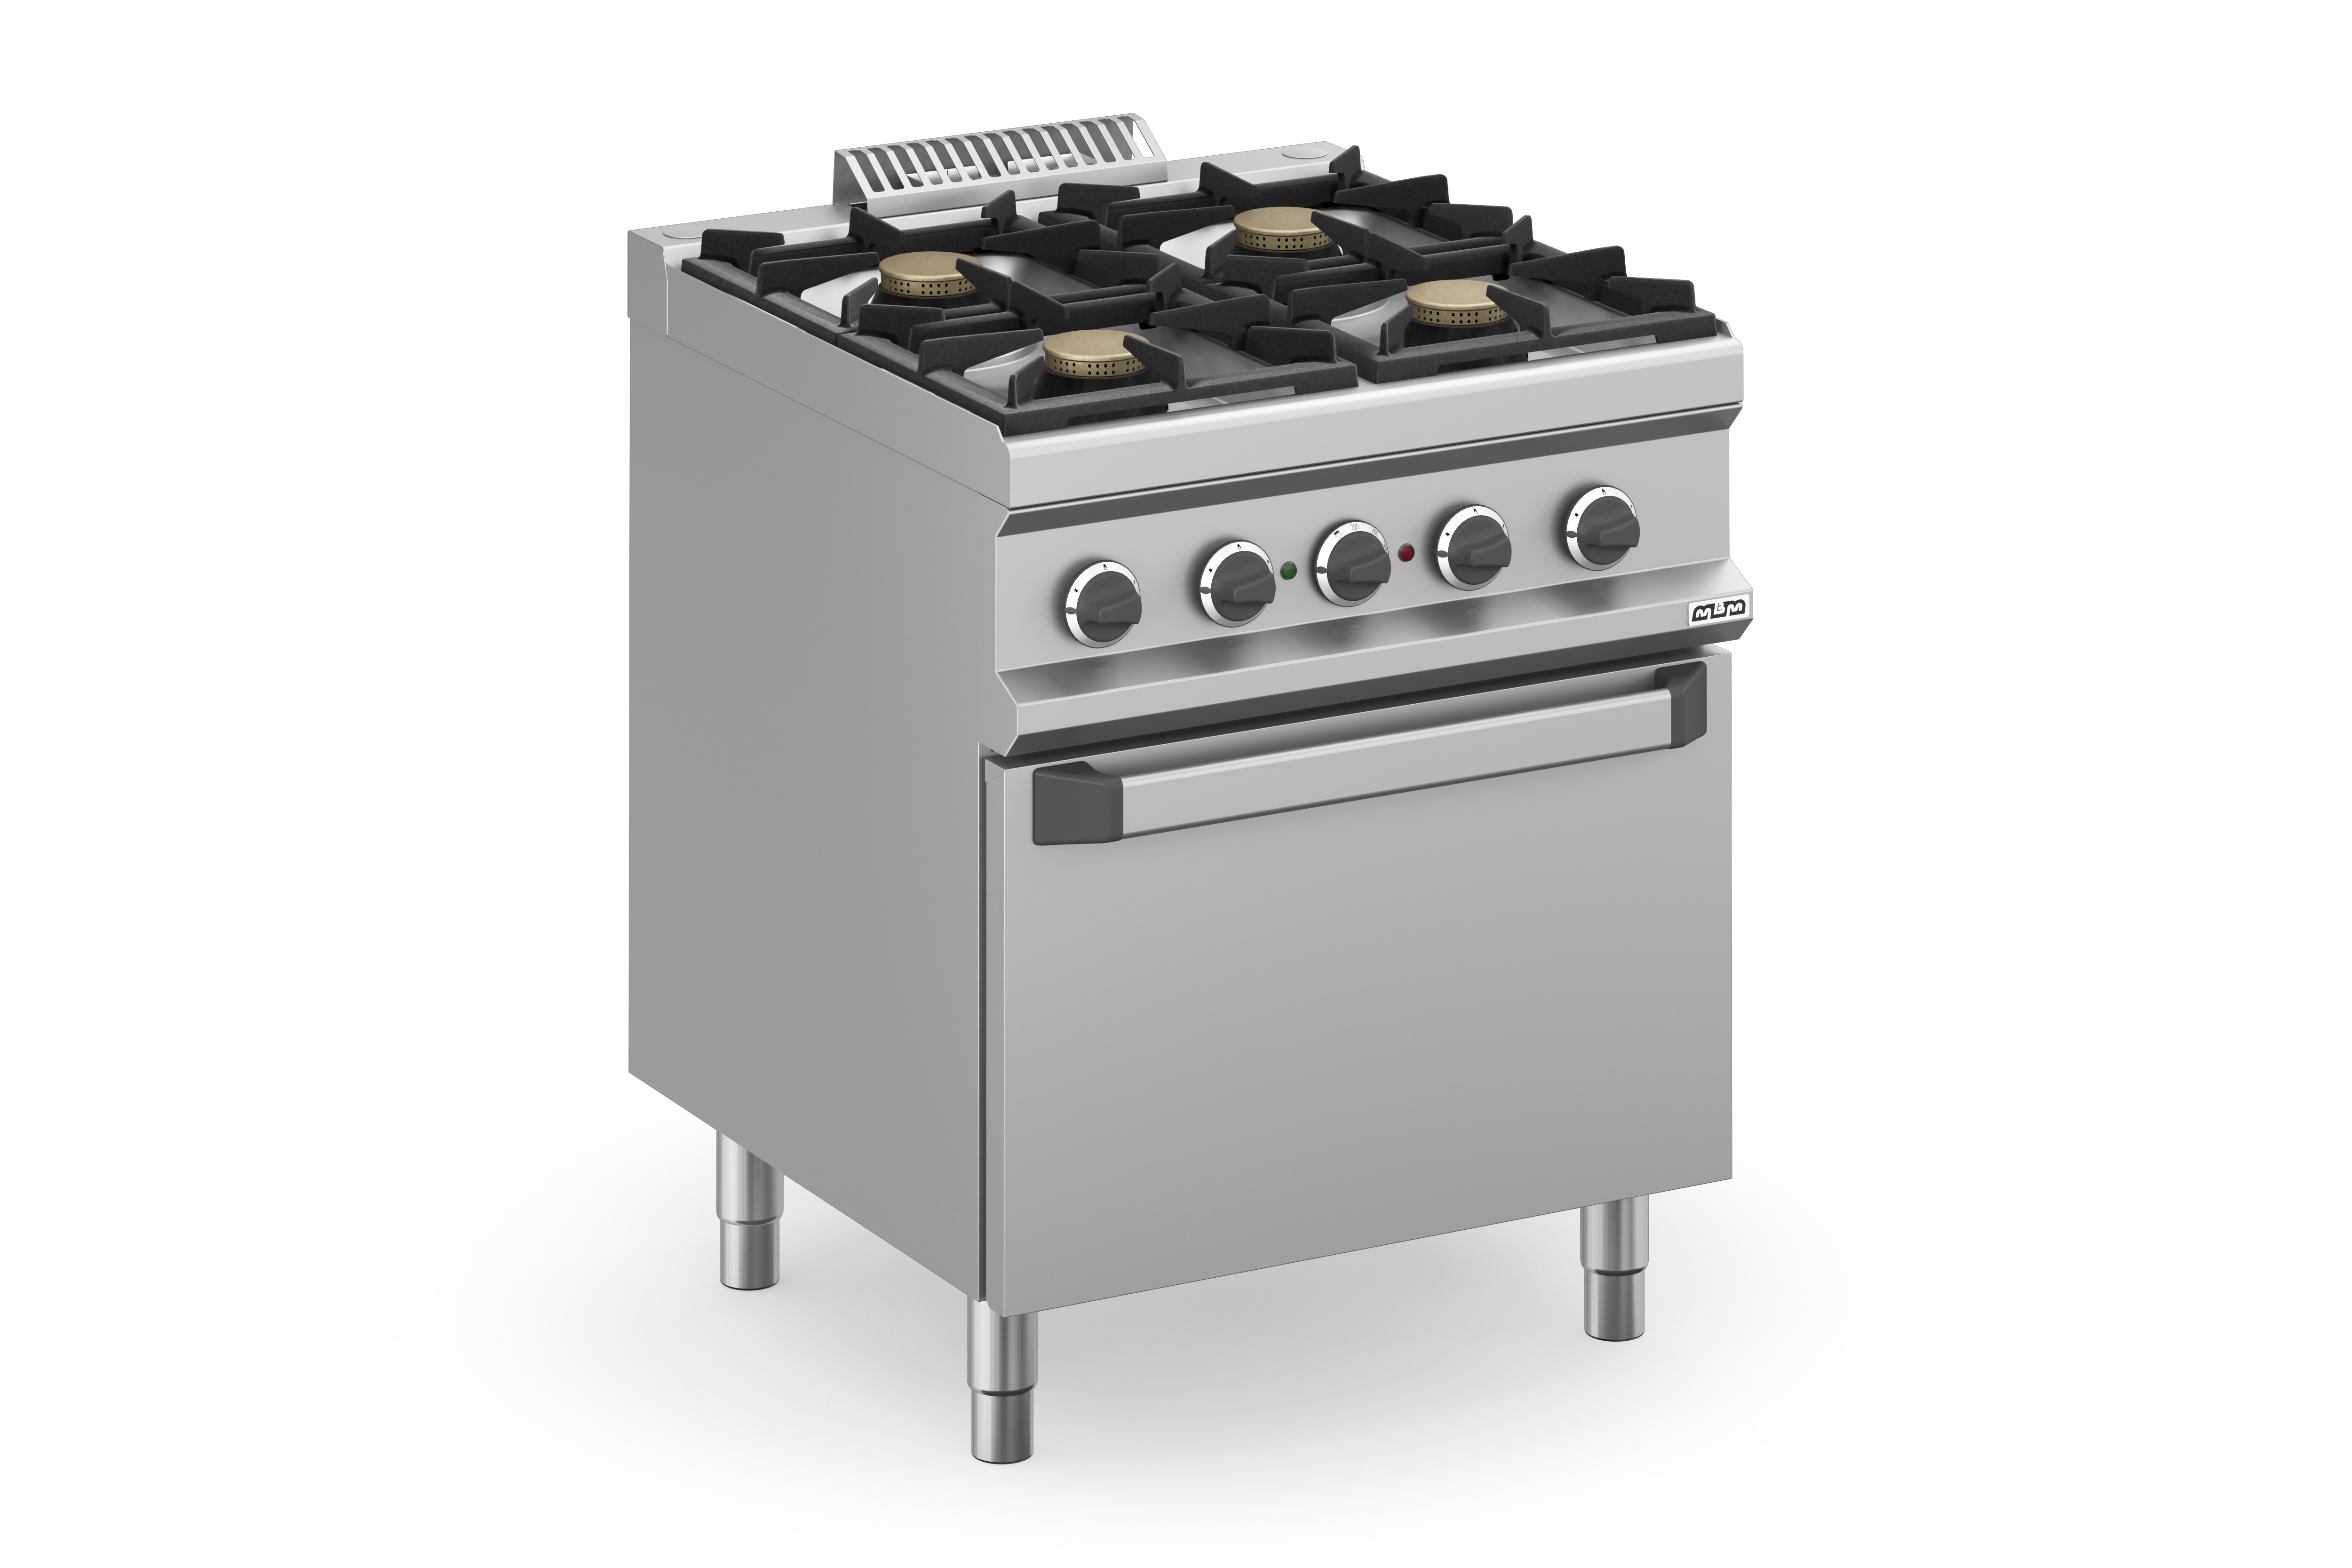 Magistra Plus 700 MFB77FEVXL 4 Burners Gas Cooker with Electric Ventilated Oven